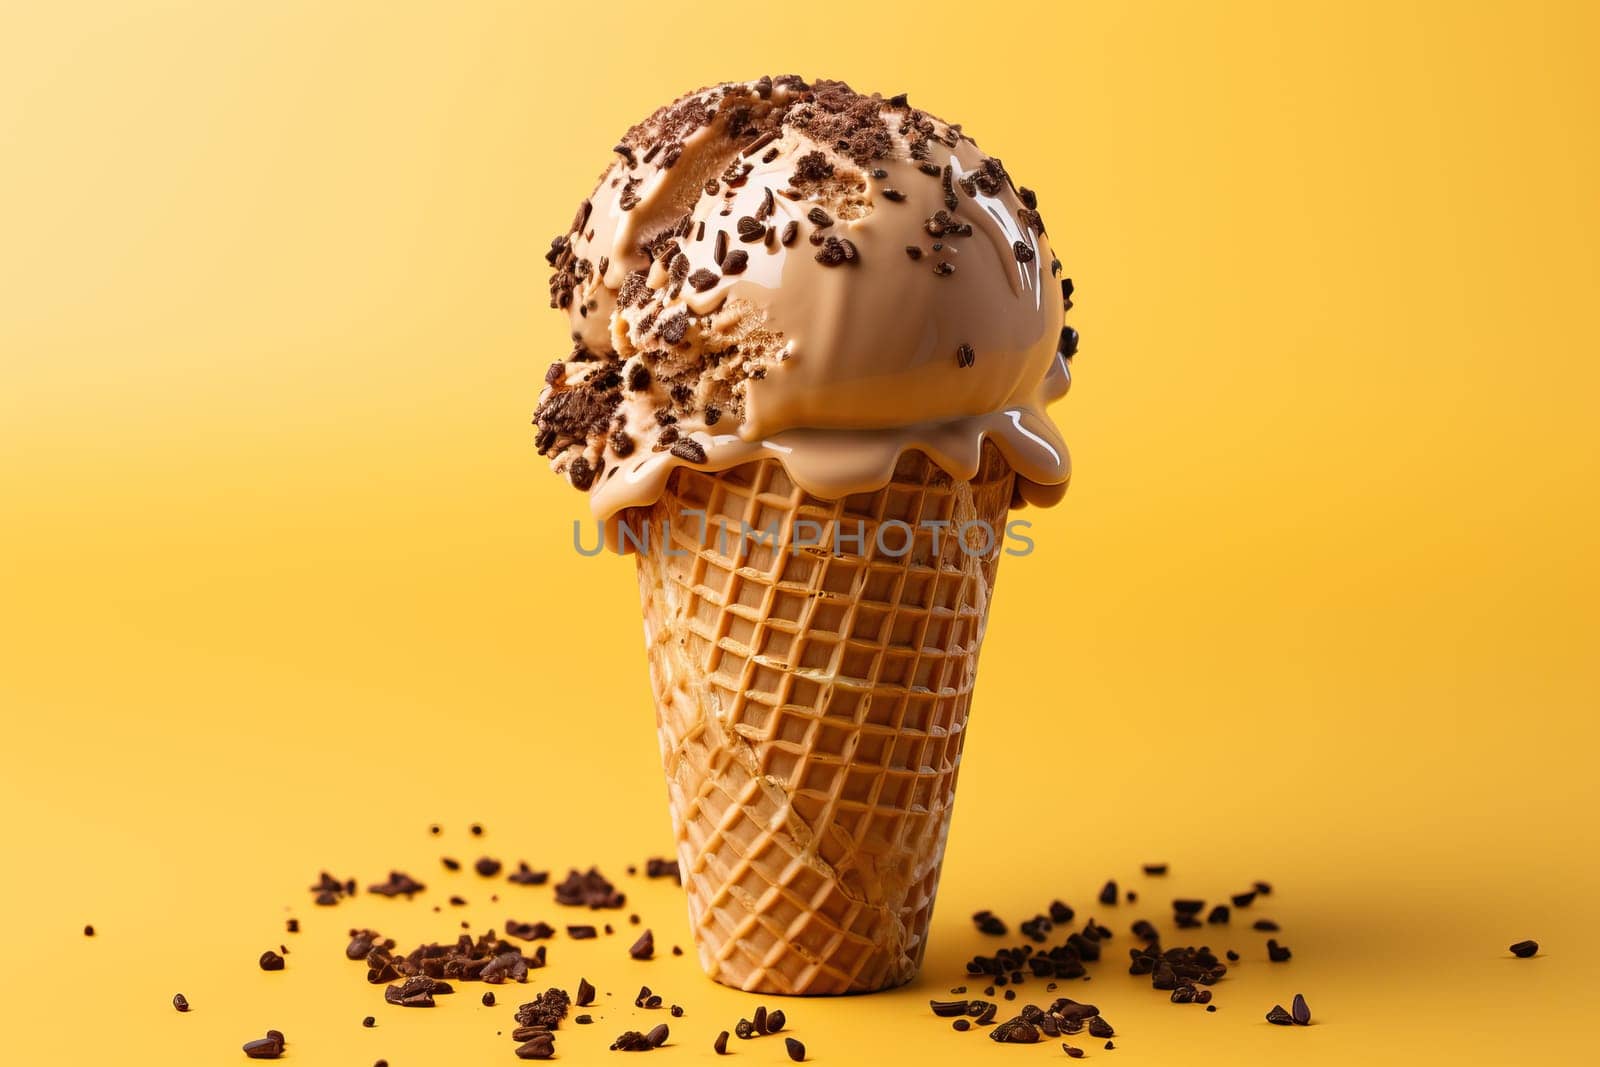 A cone of chocolate ice cream on a yellow background. by Niko_Cingaryuk